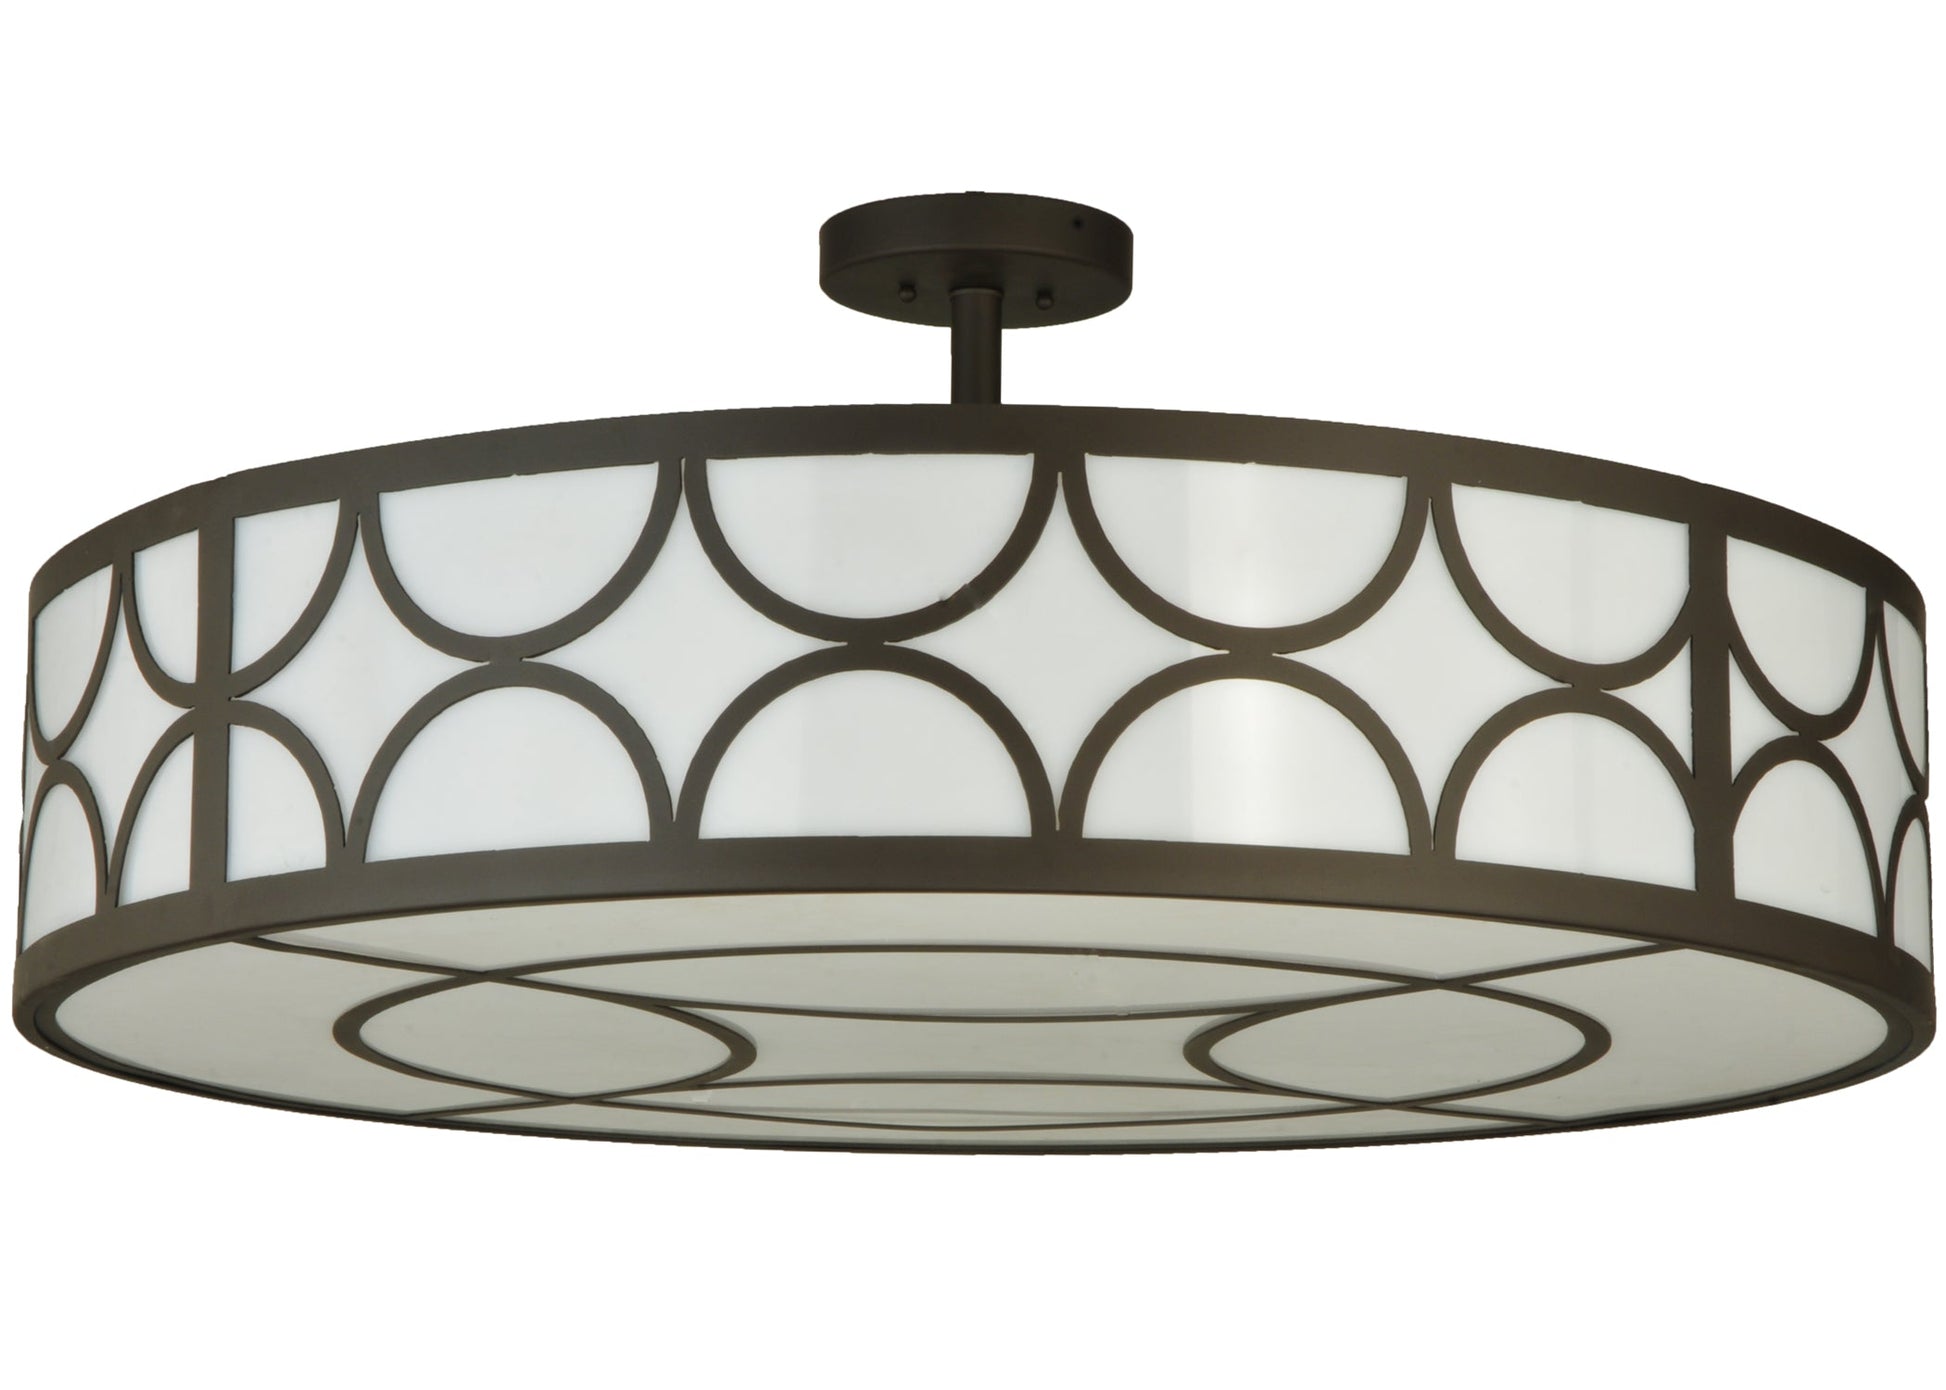 36" Revival Deco Cilindro Semi Flushmount by 2nd Ave Lighting